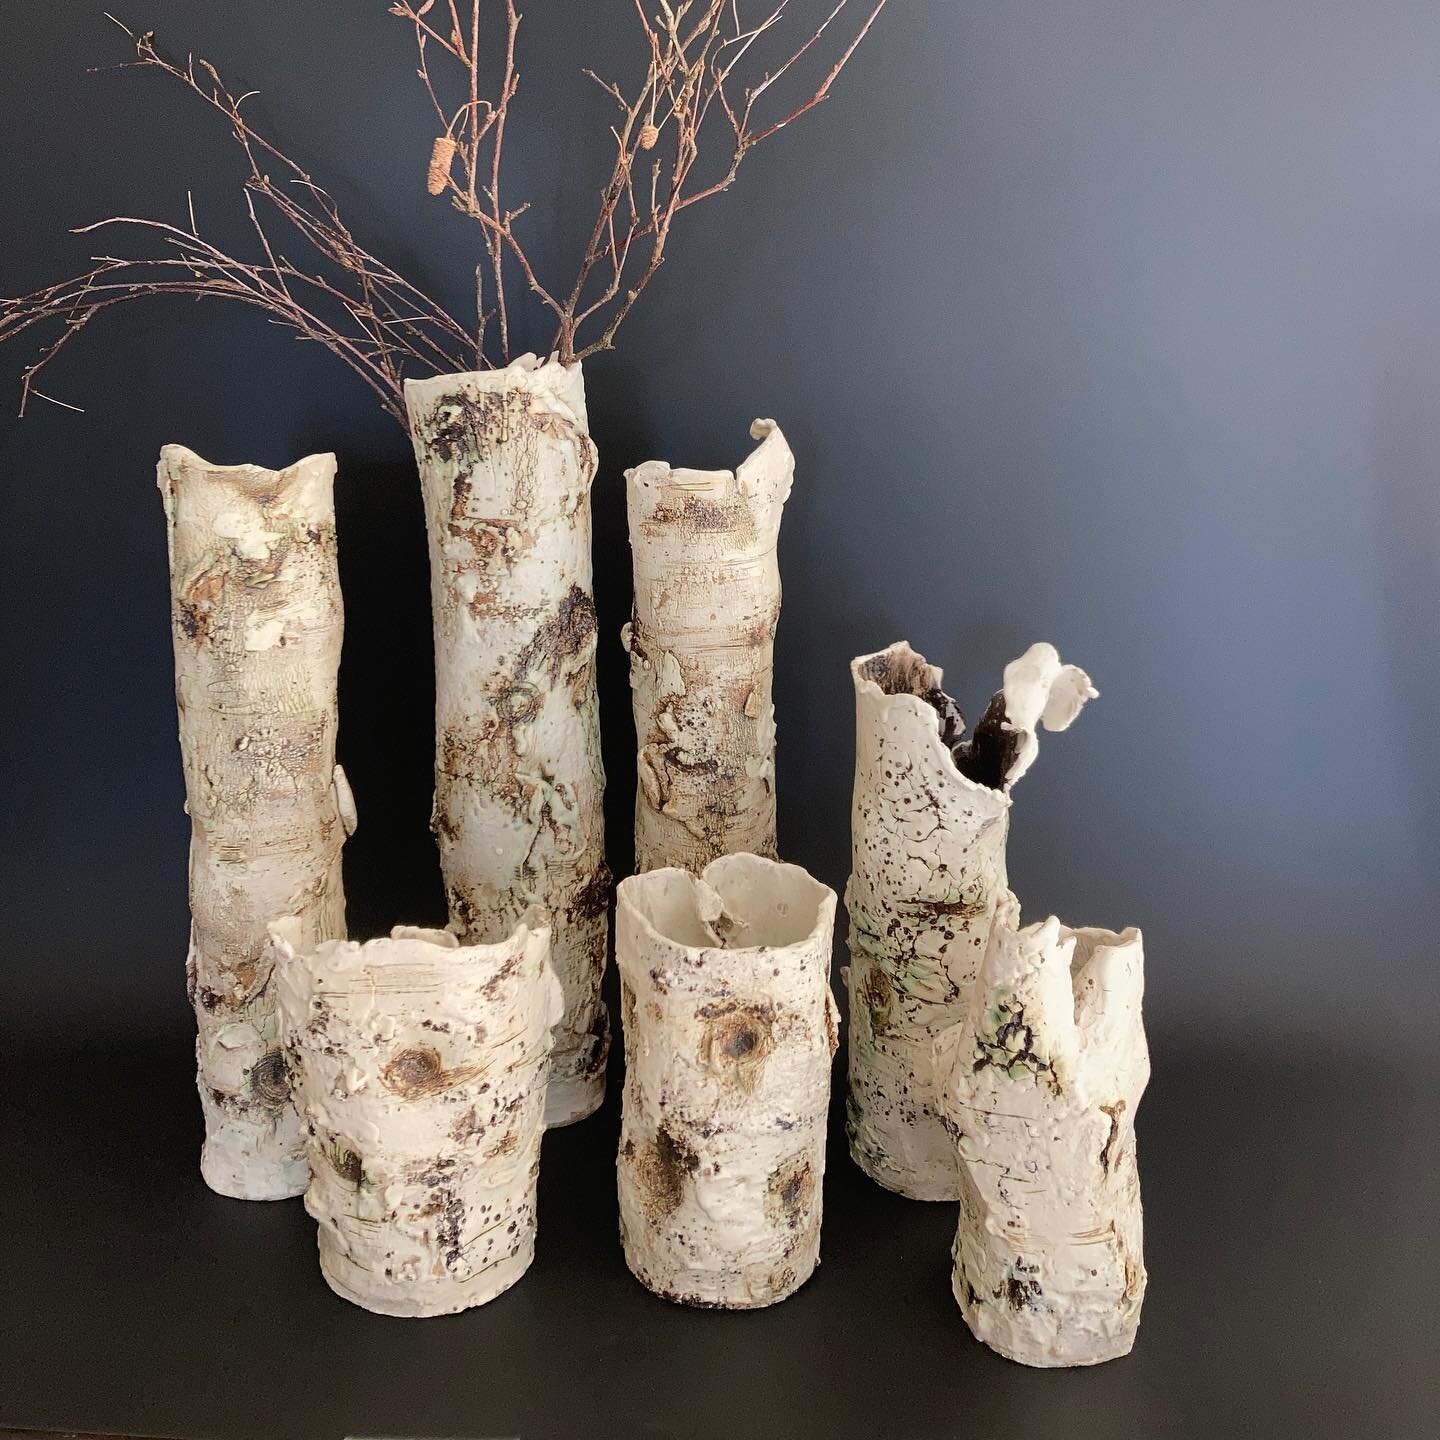 Just delivered some of these Silver Birch ceramics to @hestercombegdns gallery/shop. #silverbirch #bark #clay #localpotter #madeindevon @totnespotters #uniquepottery #wildclay